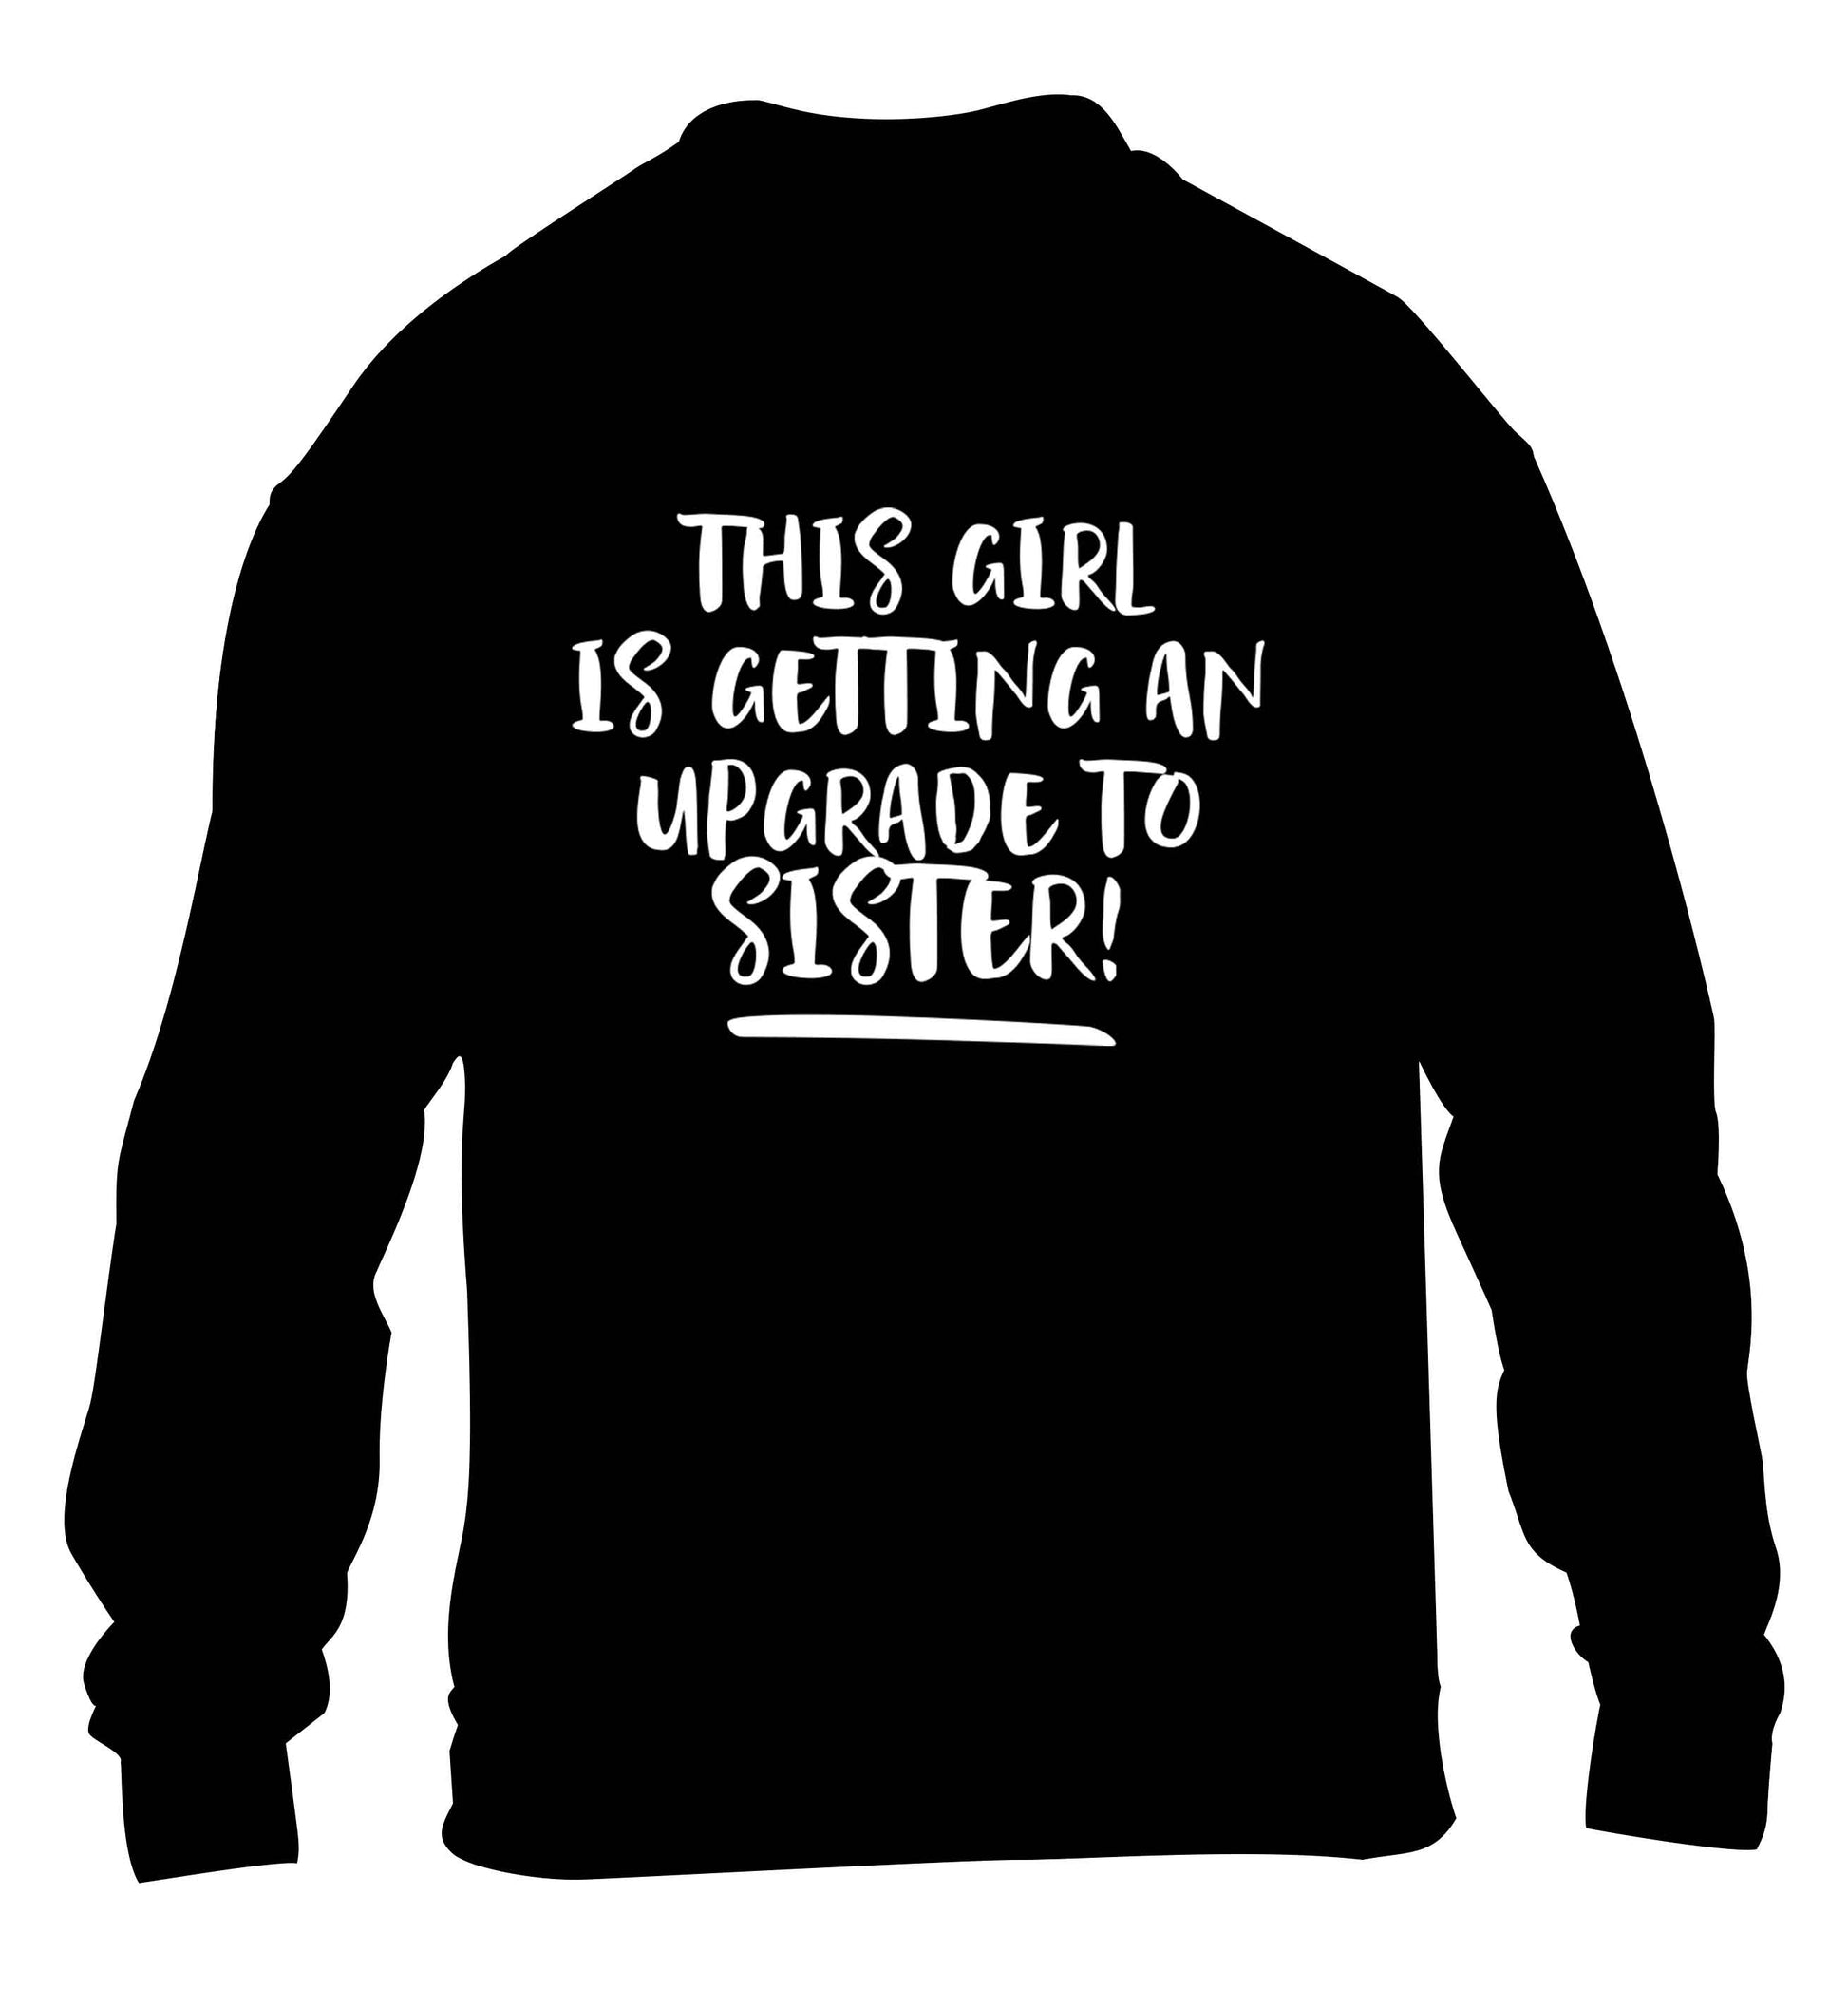 This girl is getting an upgrade to sister! children's black sweater 12-13 Years